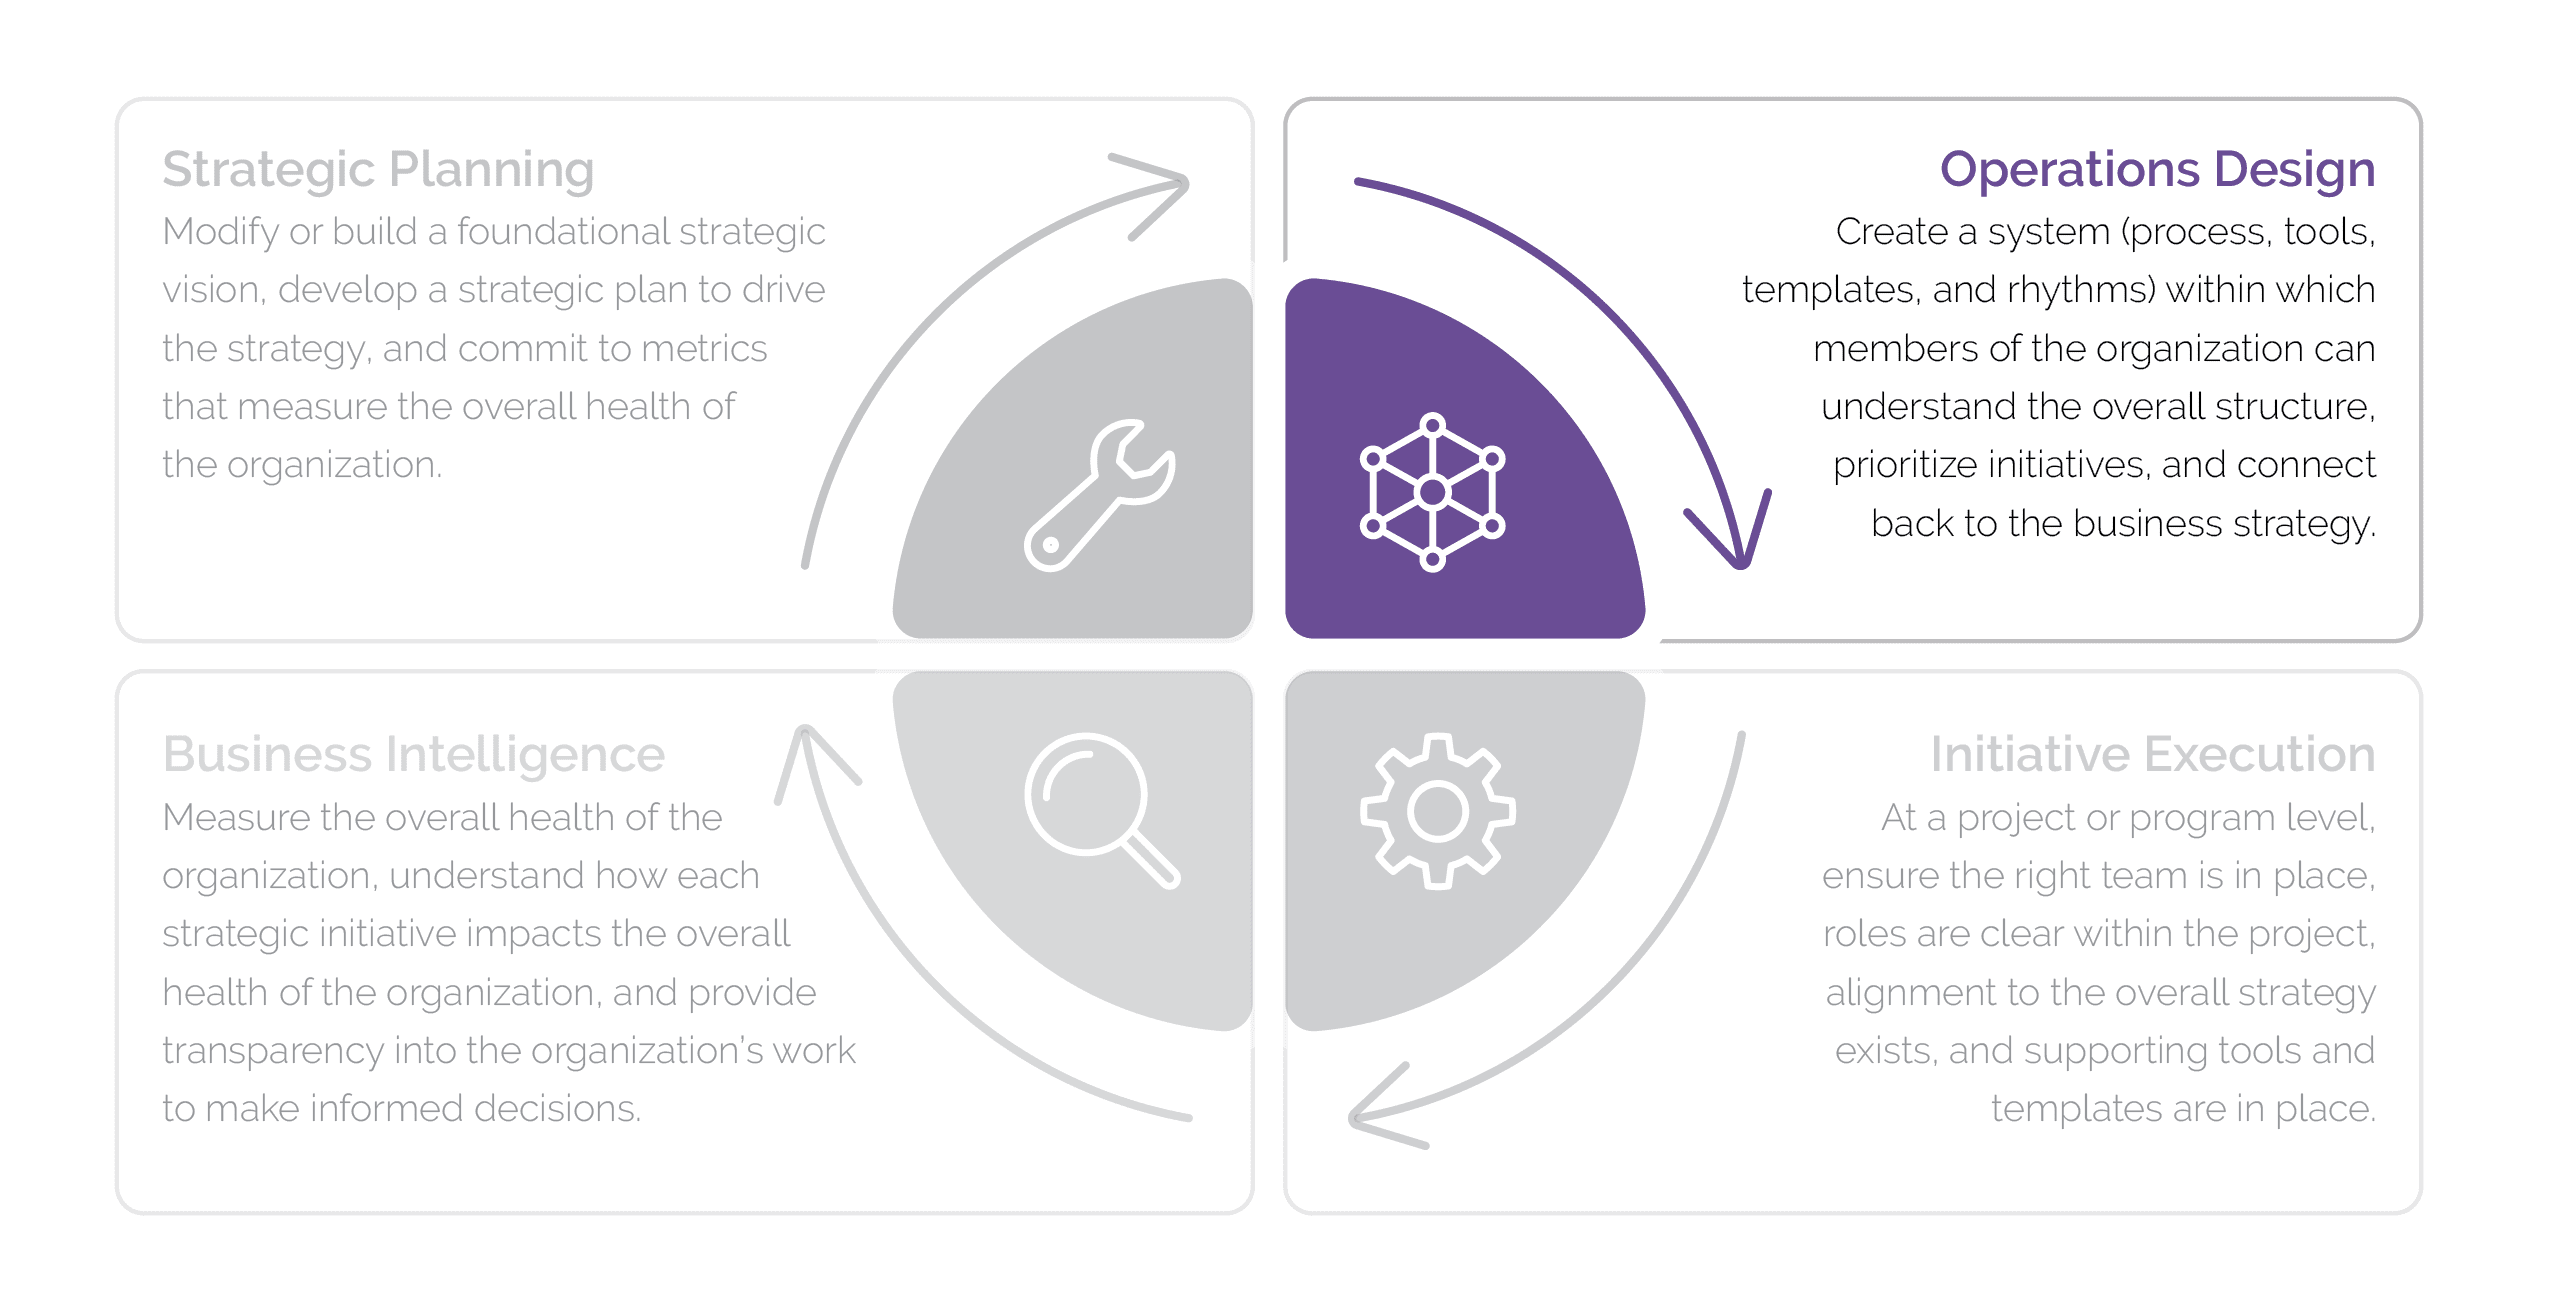 Graphic of the four steps of business operations: strategic planning, operations, design, initiative execution and business intelligence, with an emphasis on operations design